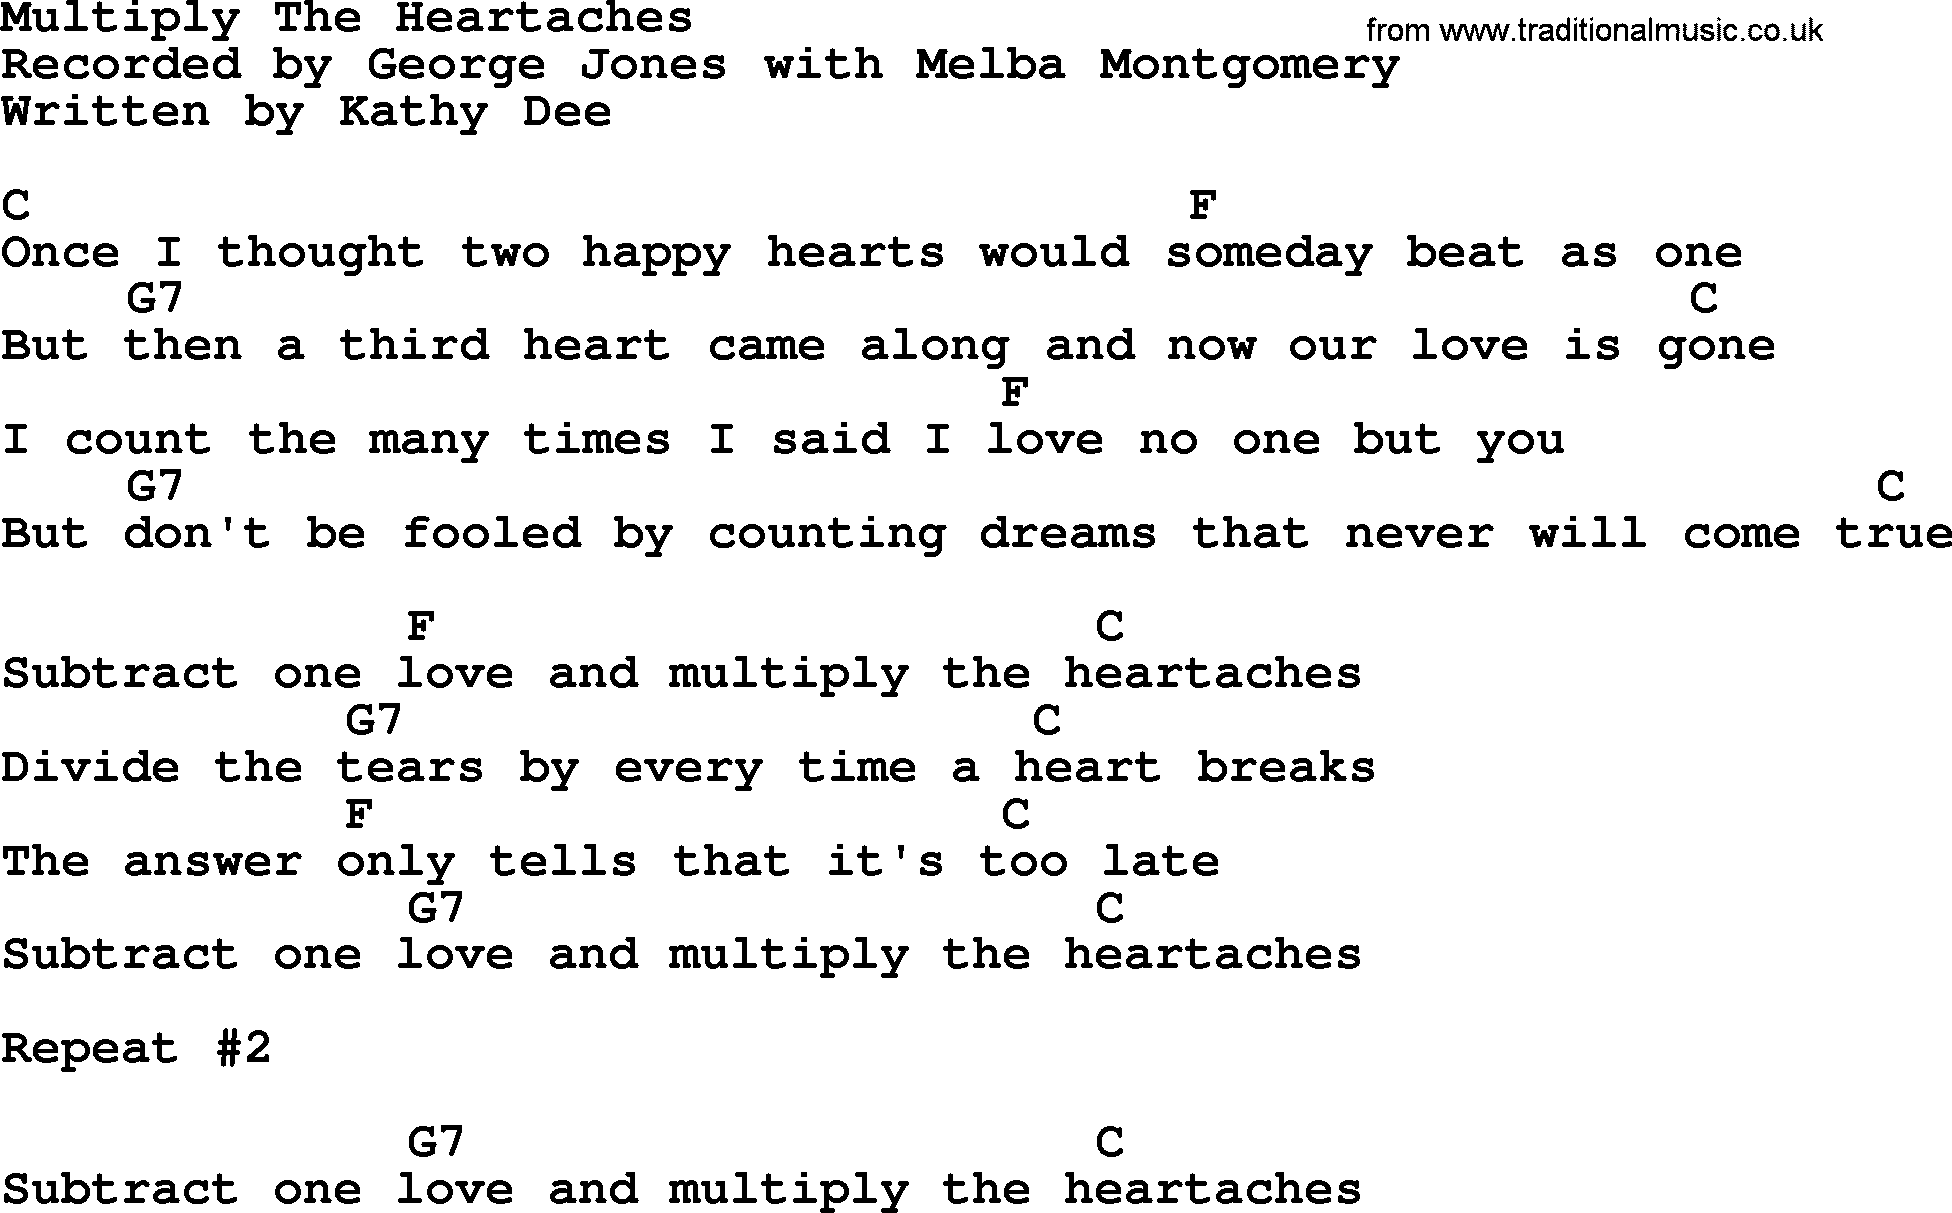 George Jones song: Multiply The Heartaches, lyrics and chords